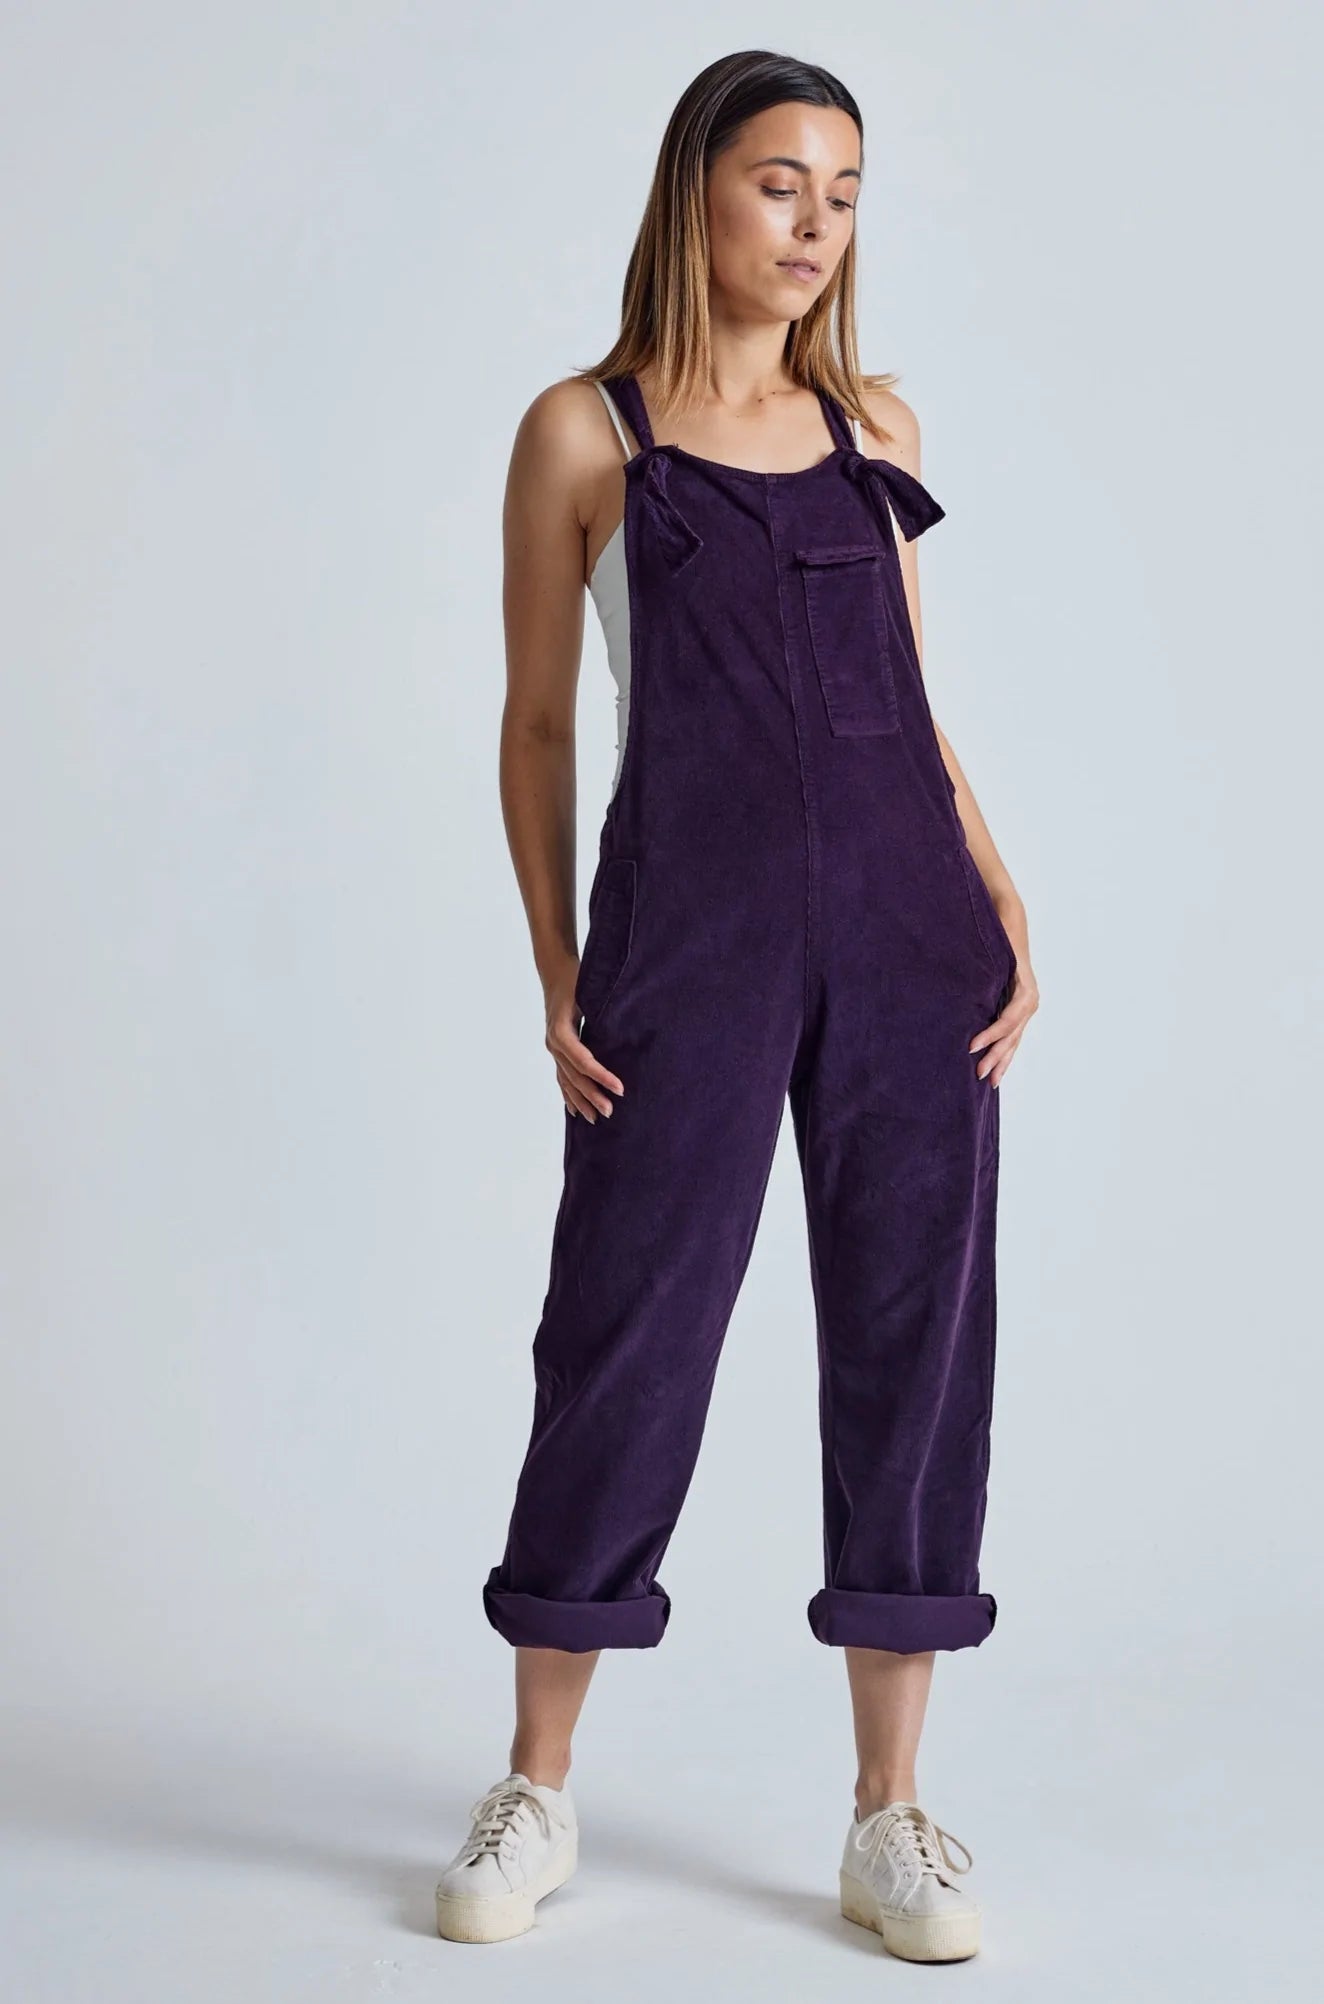 MARY-LOU Aubergine - GOTS Organic Cotton Cord Dungarees by Flax & Loom, SIZE 4 / UK 14 / EUR 42